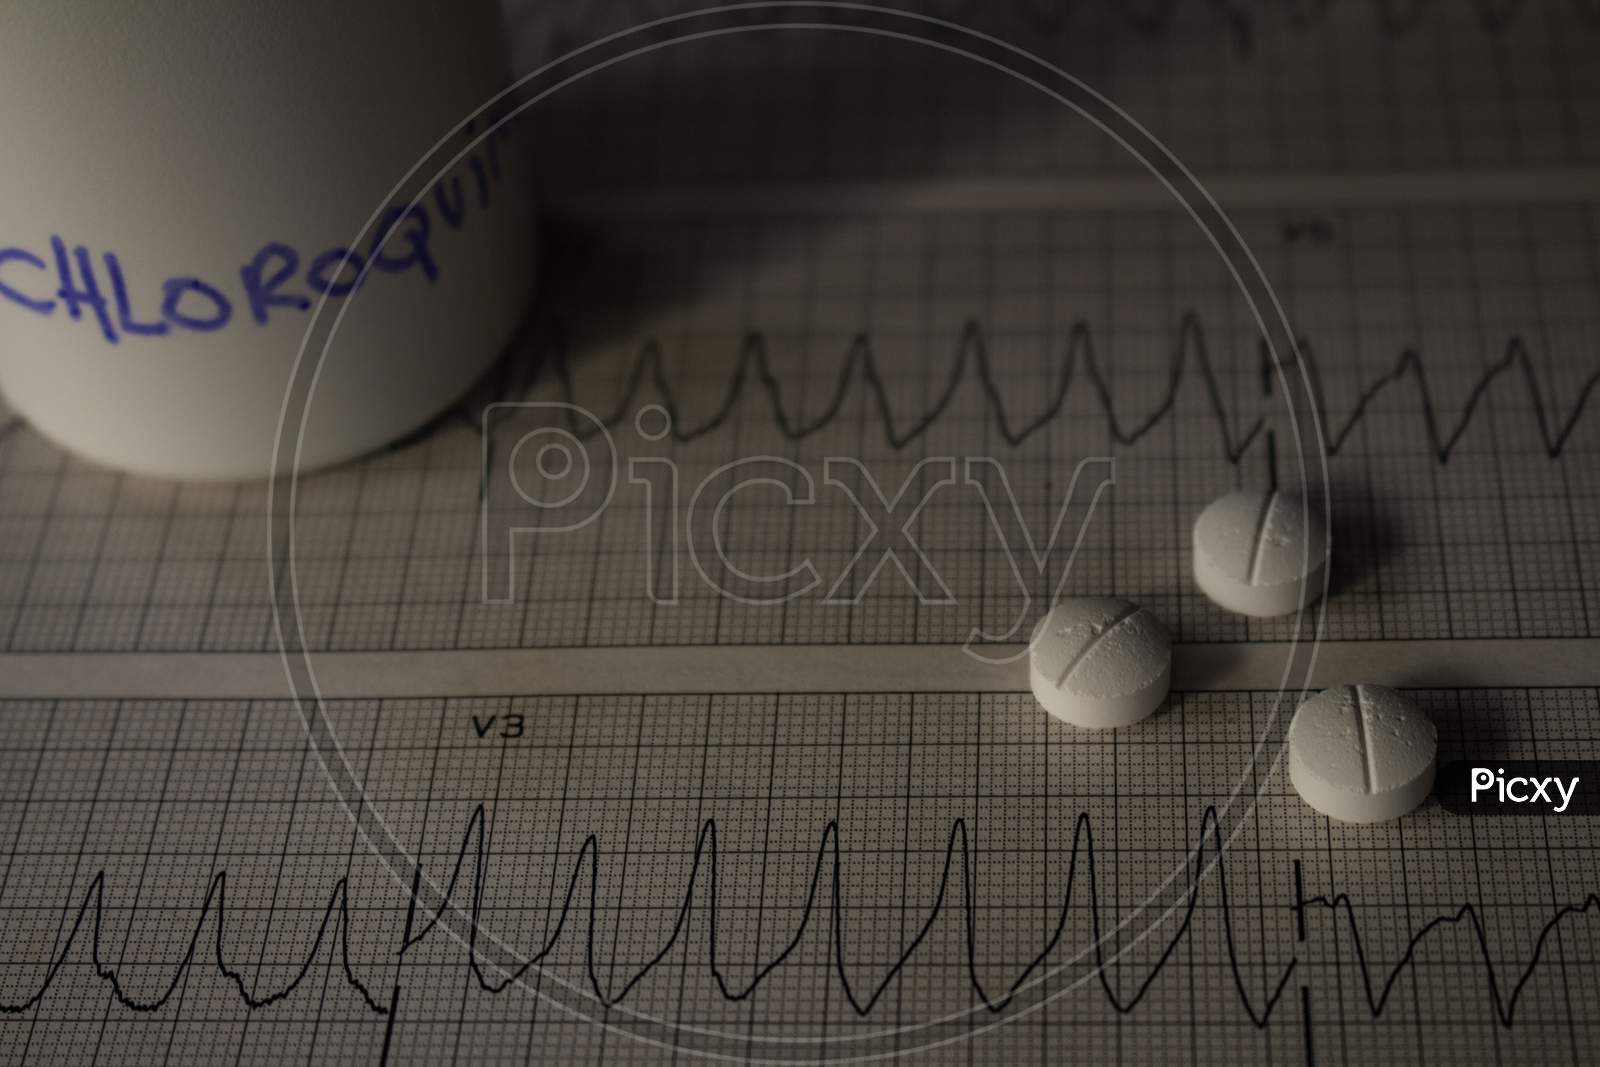 Adverse Effects On The Heart By Hydroxychloroquine Or Chloroquine. Pills On An Electrocardiogram With Cardiac Arrhythmias. White Container With "Hydroxychloroquine" Written On The Side.